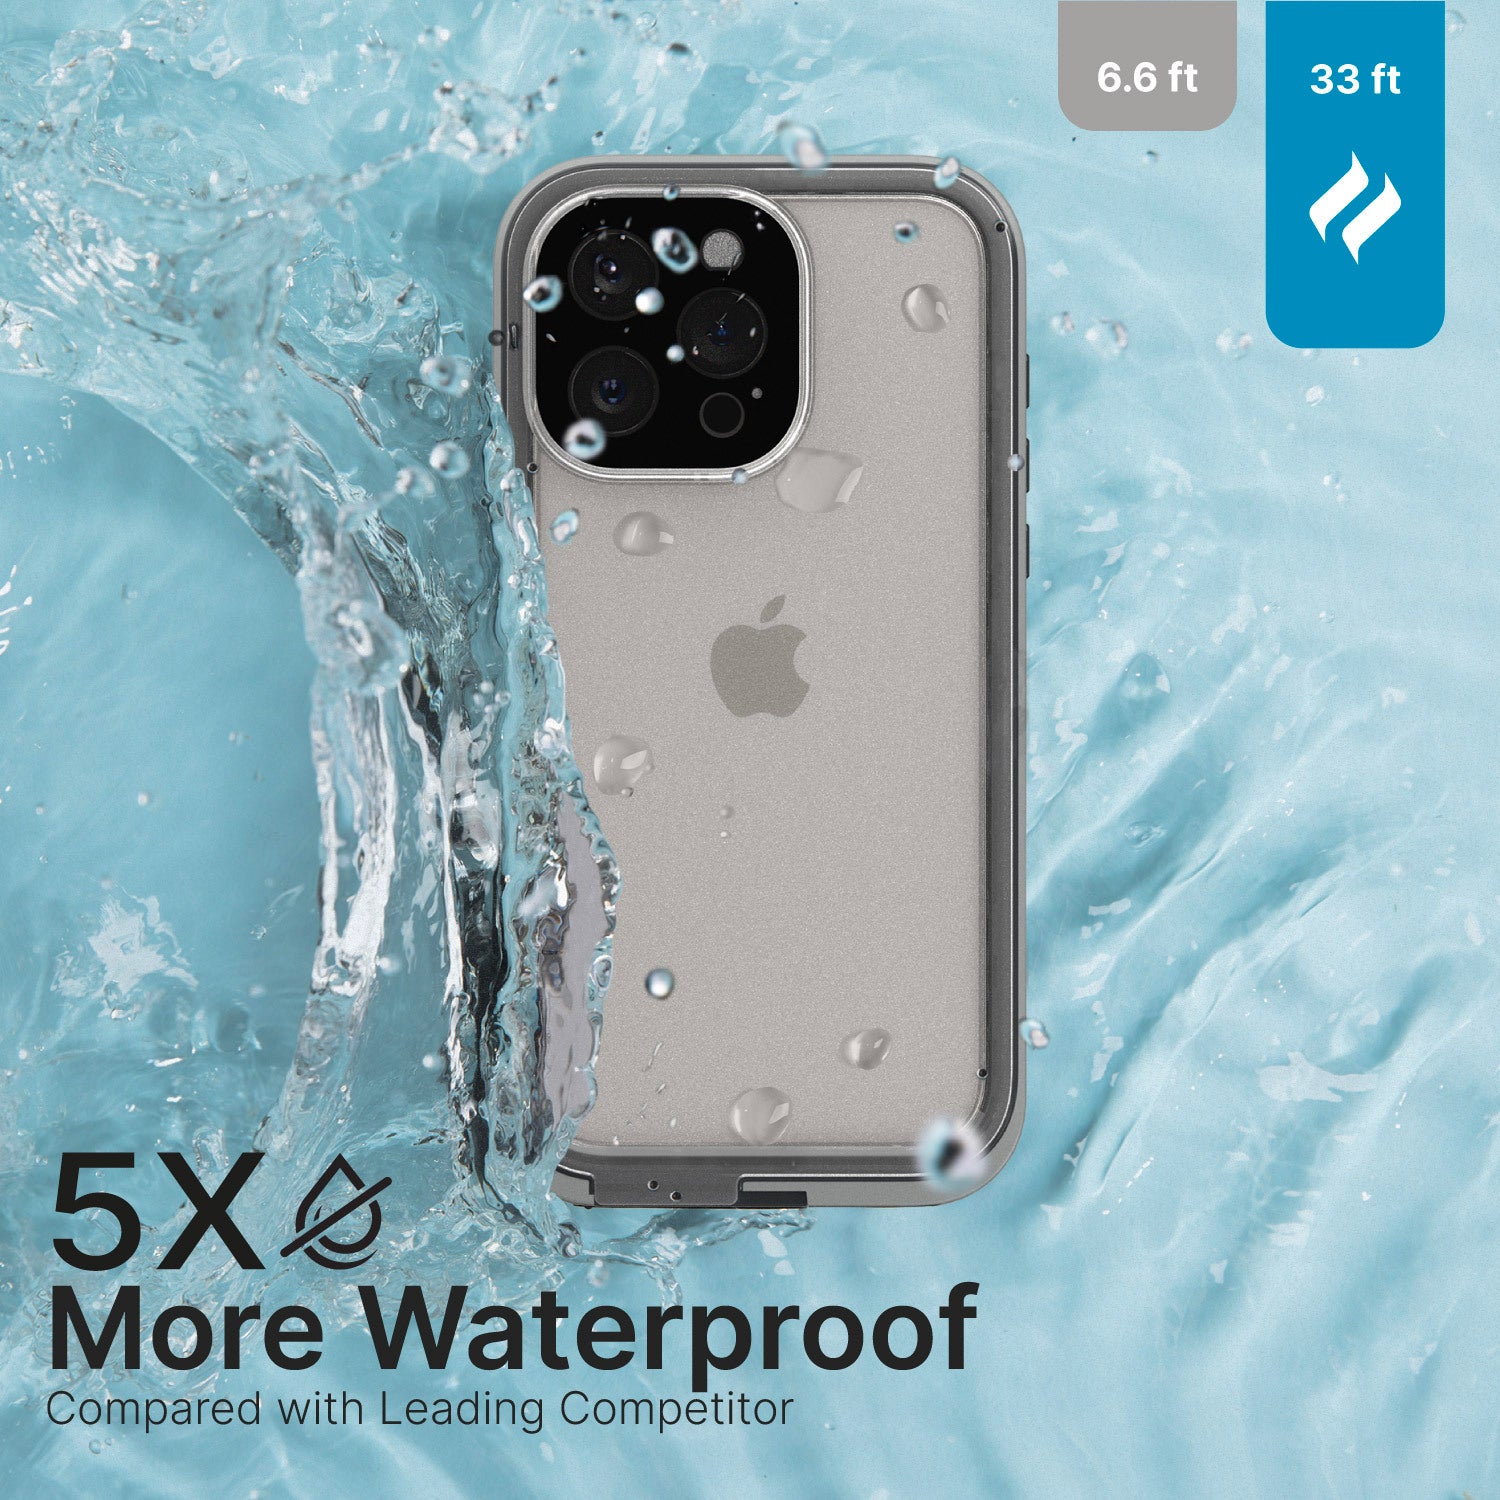 CATIPHO15GRYLP-FBA | Catalyst iPhone 15 Pro MaxWaterproof Case Total Protection case splashed in water 5 times more waterproof